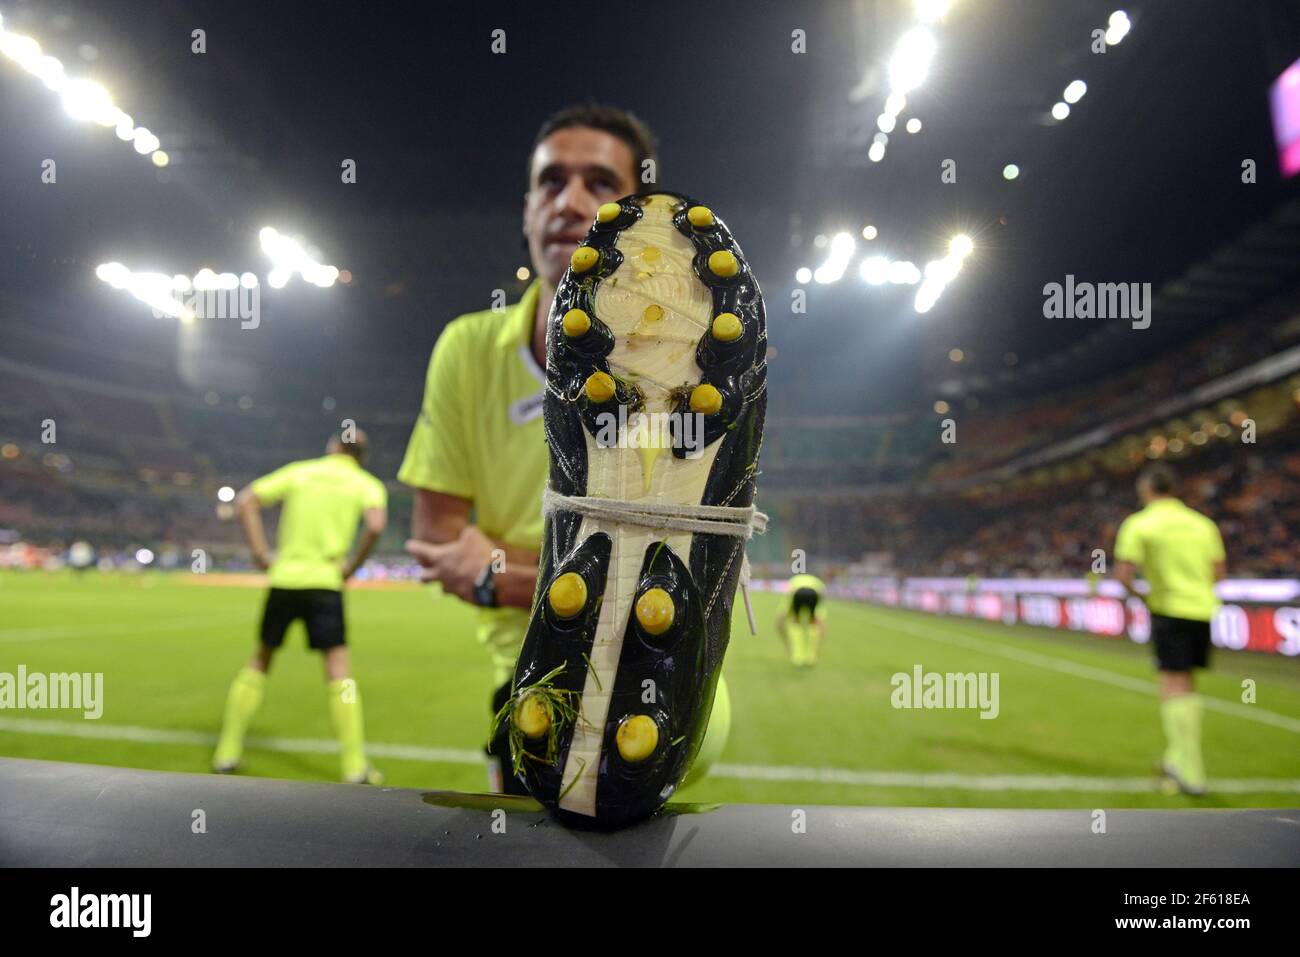 Football referee warm up before the italian  Serie A football match at the San Siro stadium, in Milan. Stock Photo